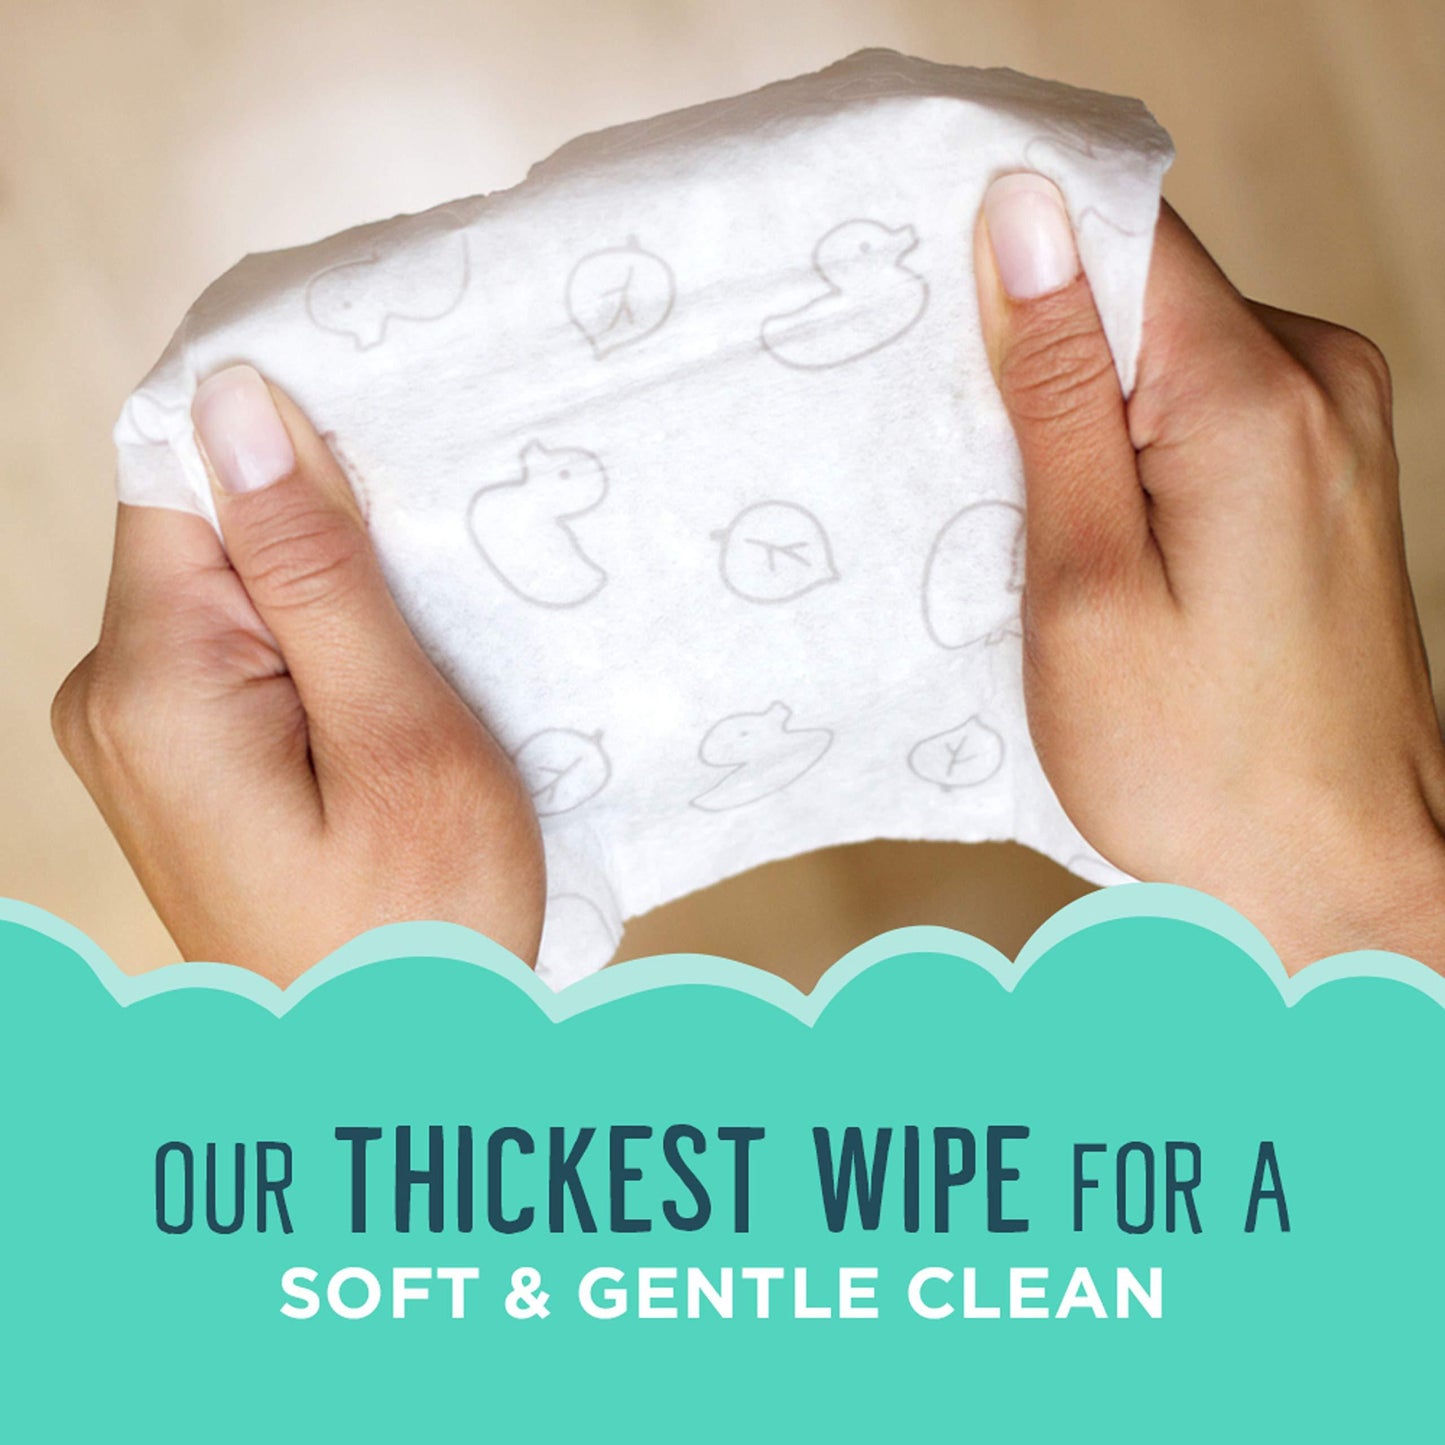 Seventh Generation Free and Clear Baby Wipes Widget (Bundle of 3)